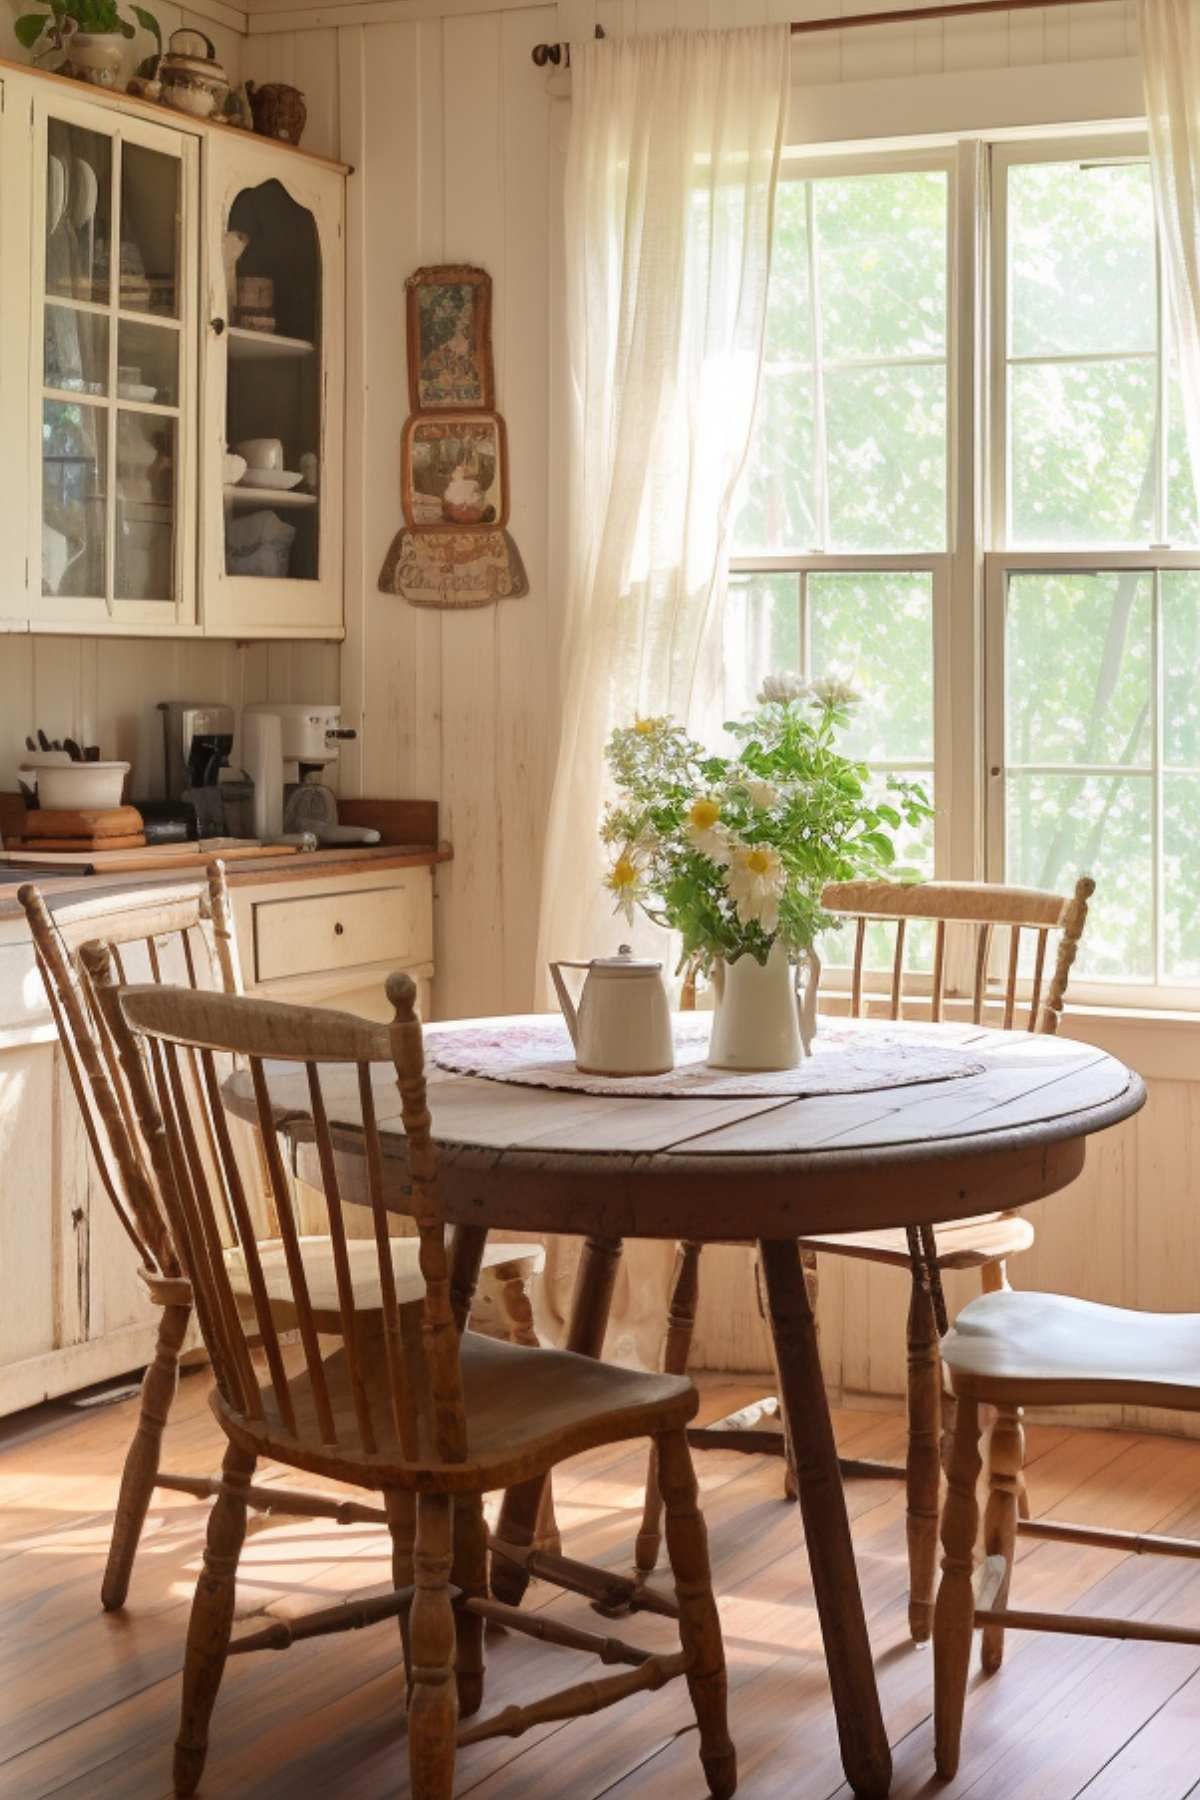 Transform Your Dining Room with a
Farmhouse Style Table